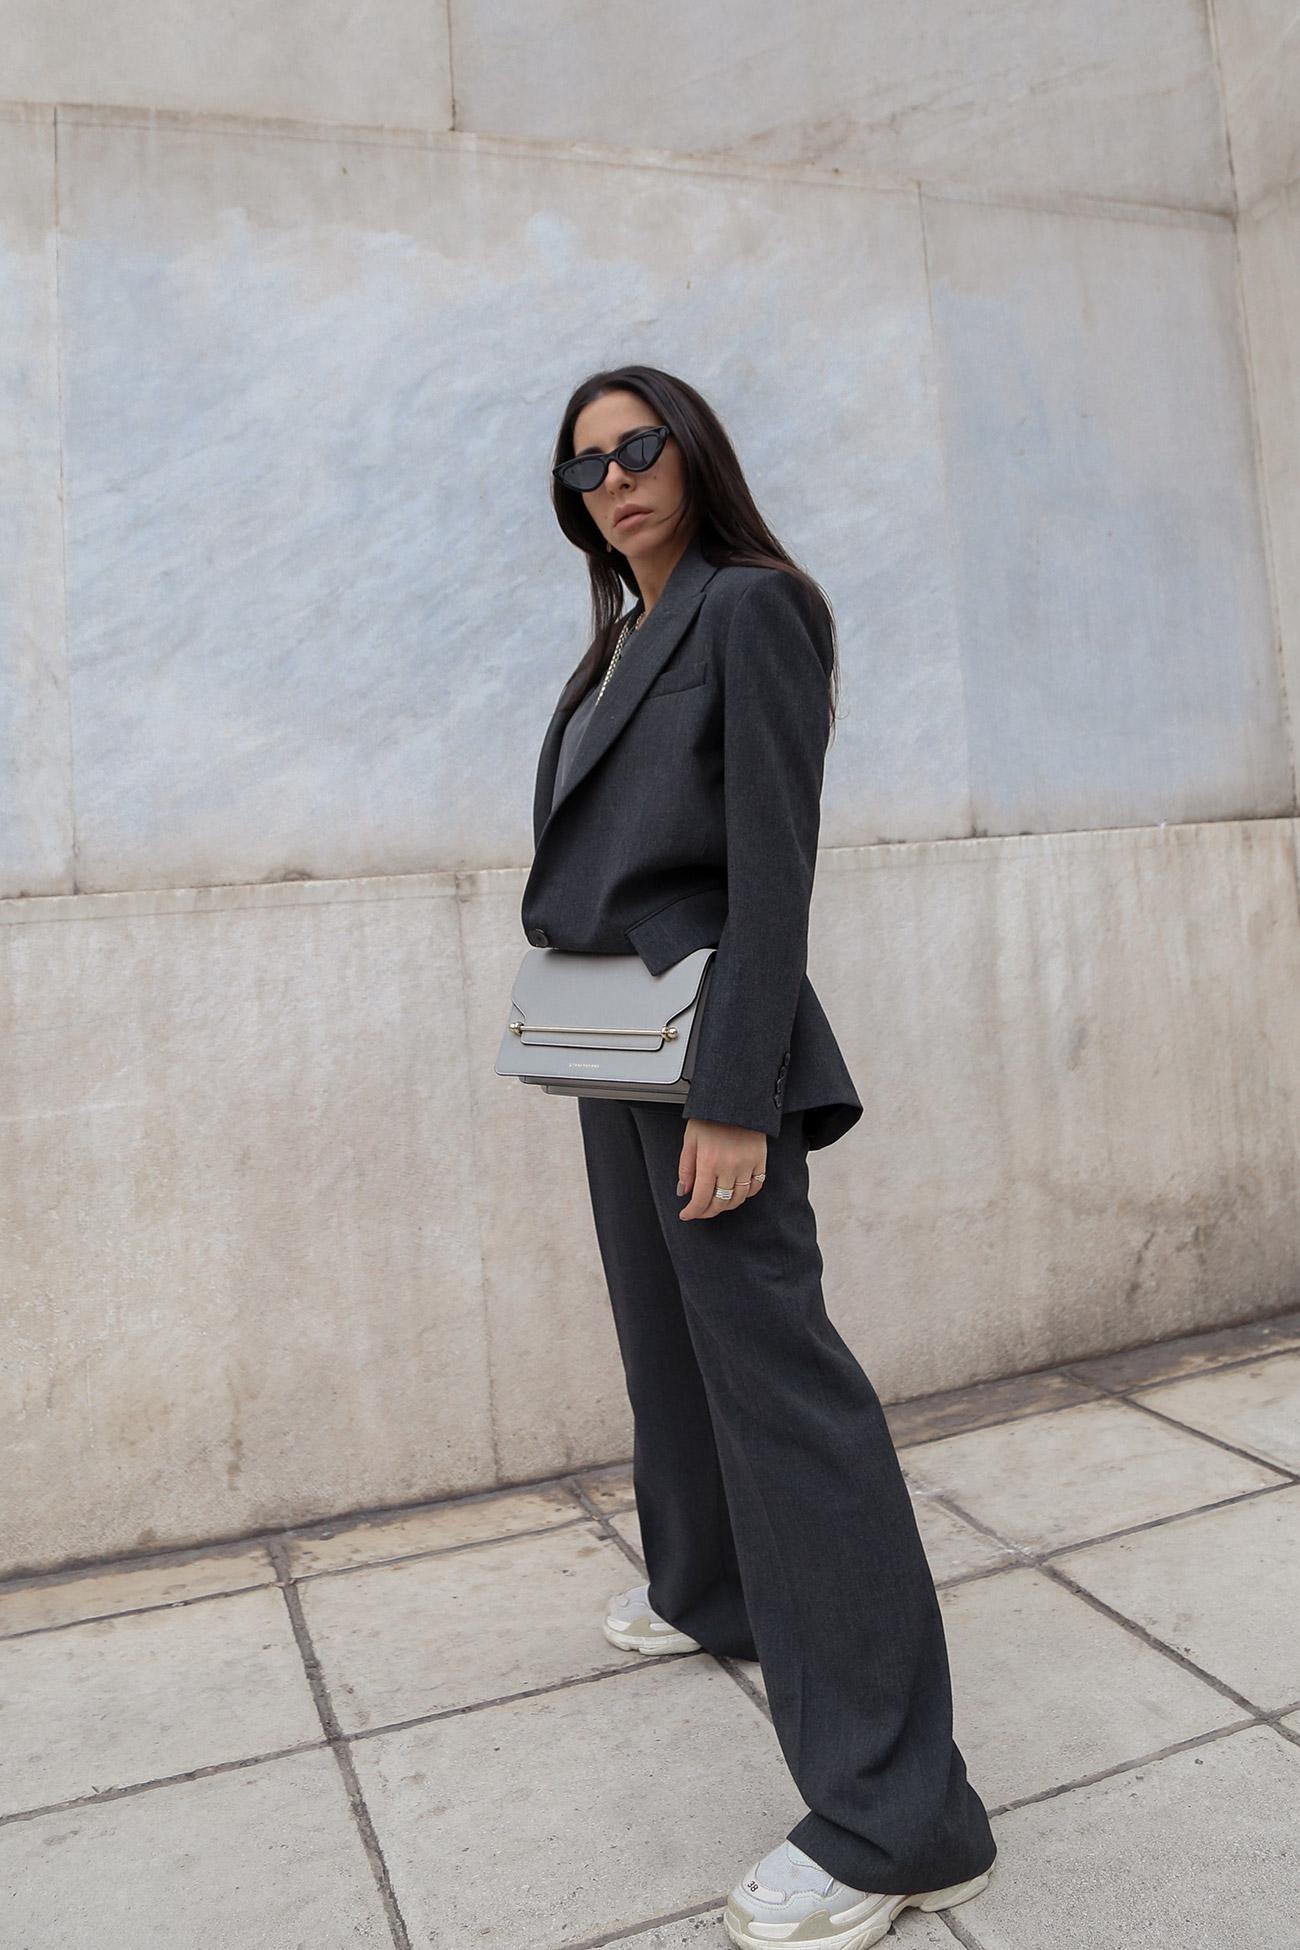 How To Wear A Women's Suit Casually & 10 Outfit Ideas - Stella ASteria